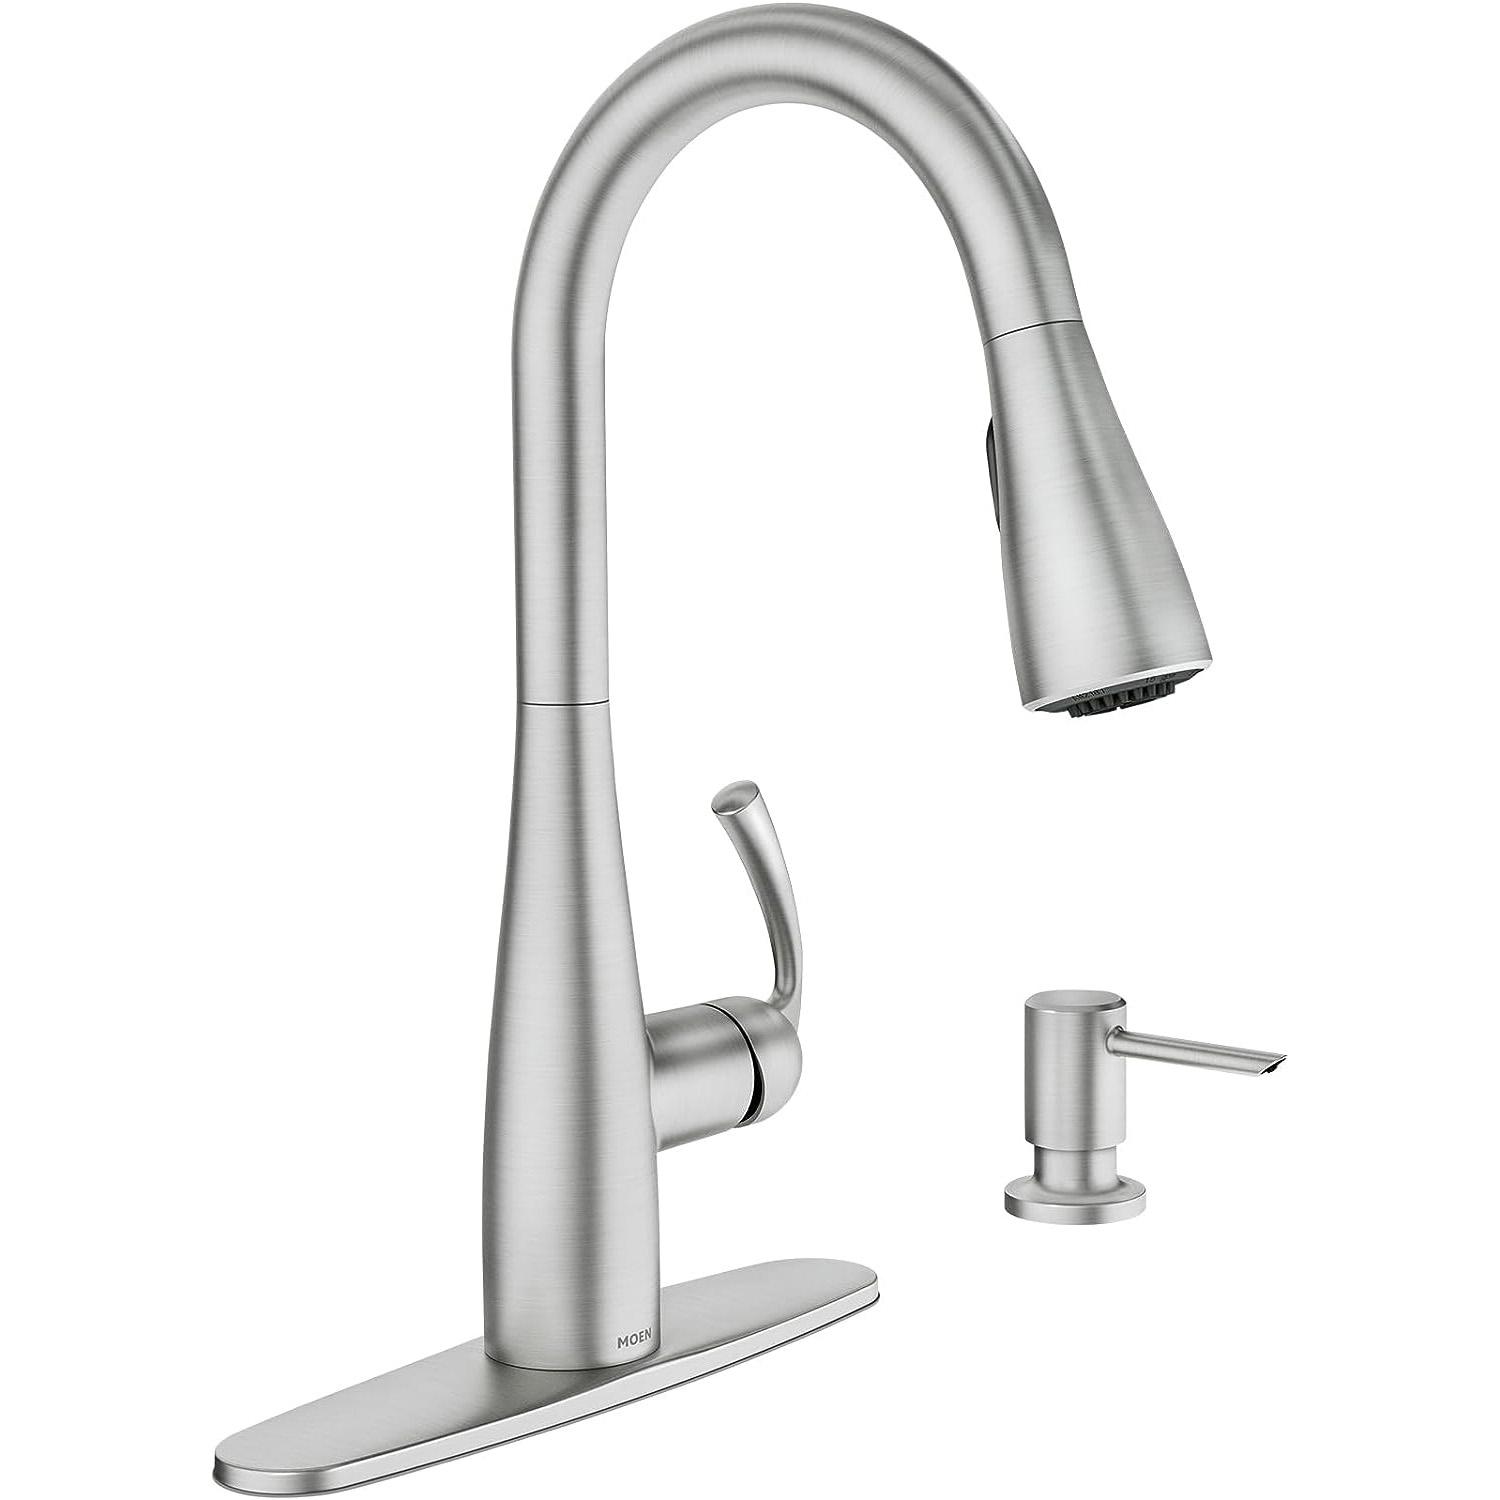 Moen Essie 87014SRS Spot Resist Stainless Pull-down Kitchen Faucet for $99.95 Shipped